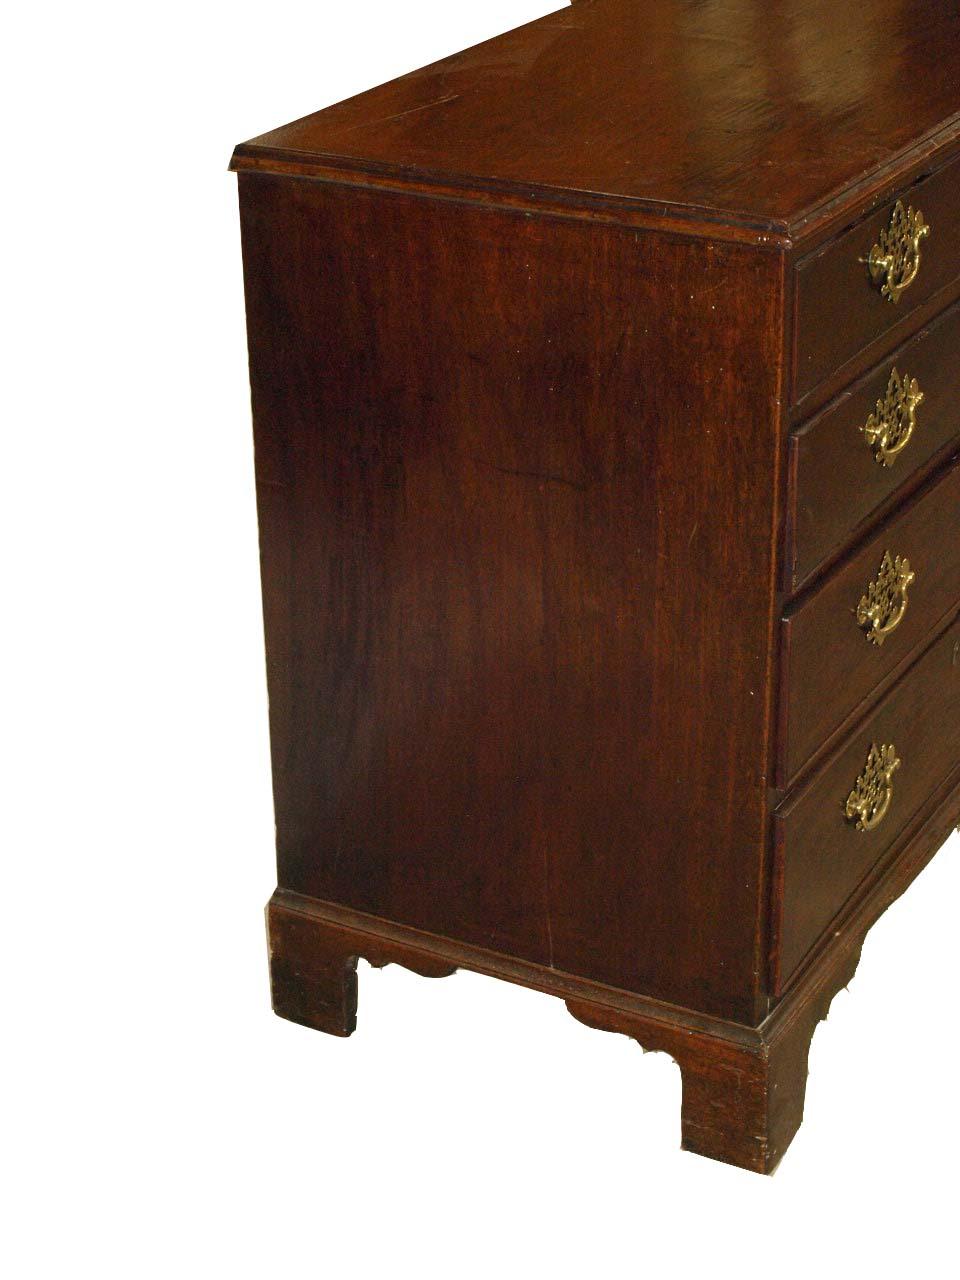 English Chippendale bachelor's chest, the two over three drawers with open fretwork brass pulls that are not original but are handmade copies of an original 18th century pull; this chest retains it's original finish, and the bracket feet are also